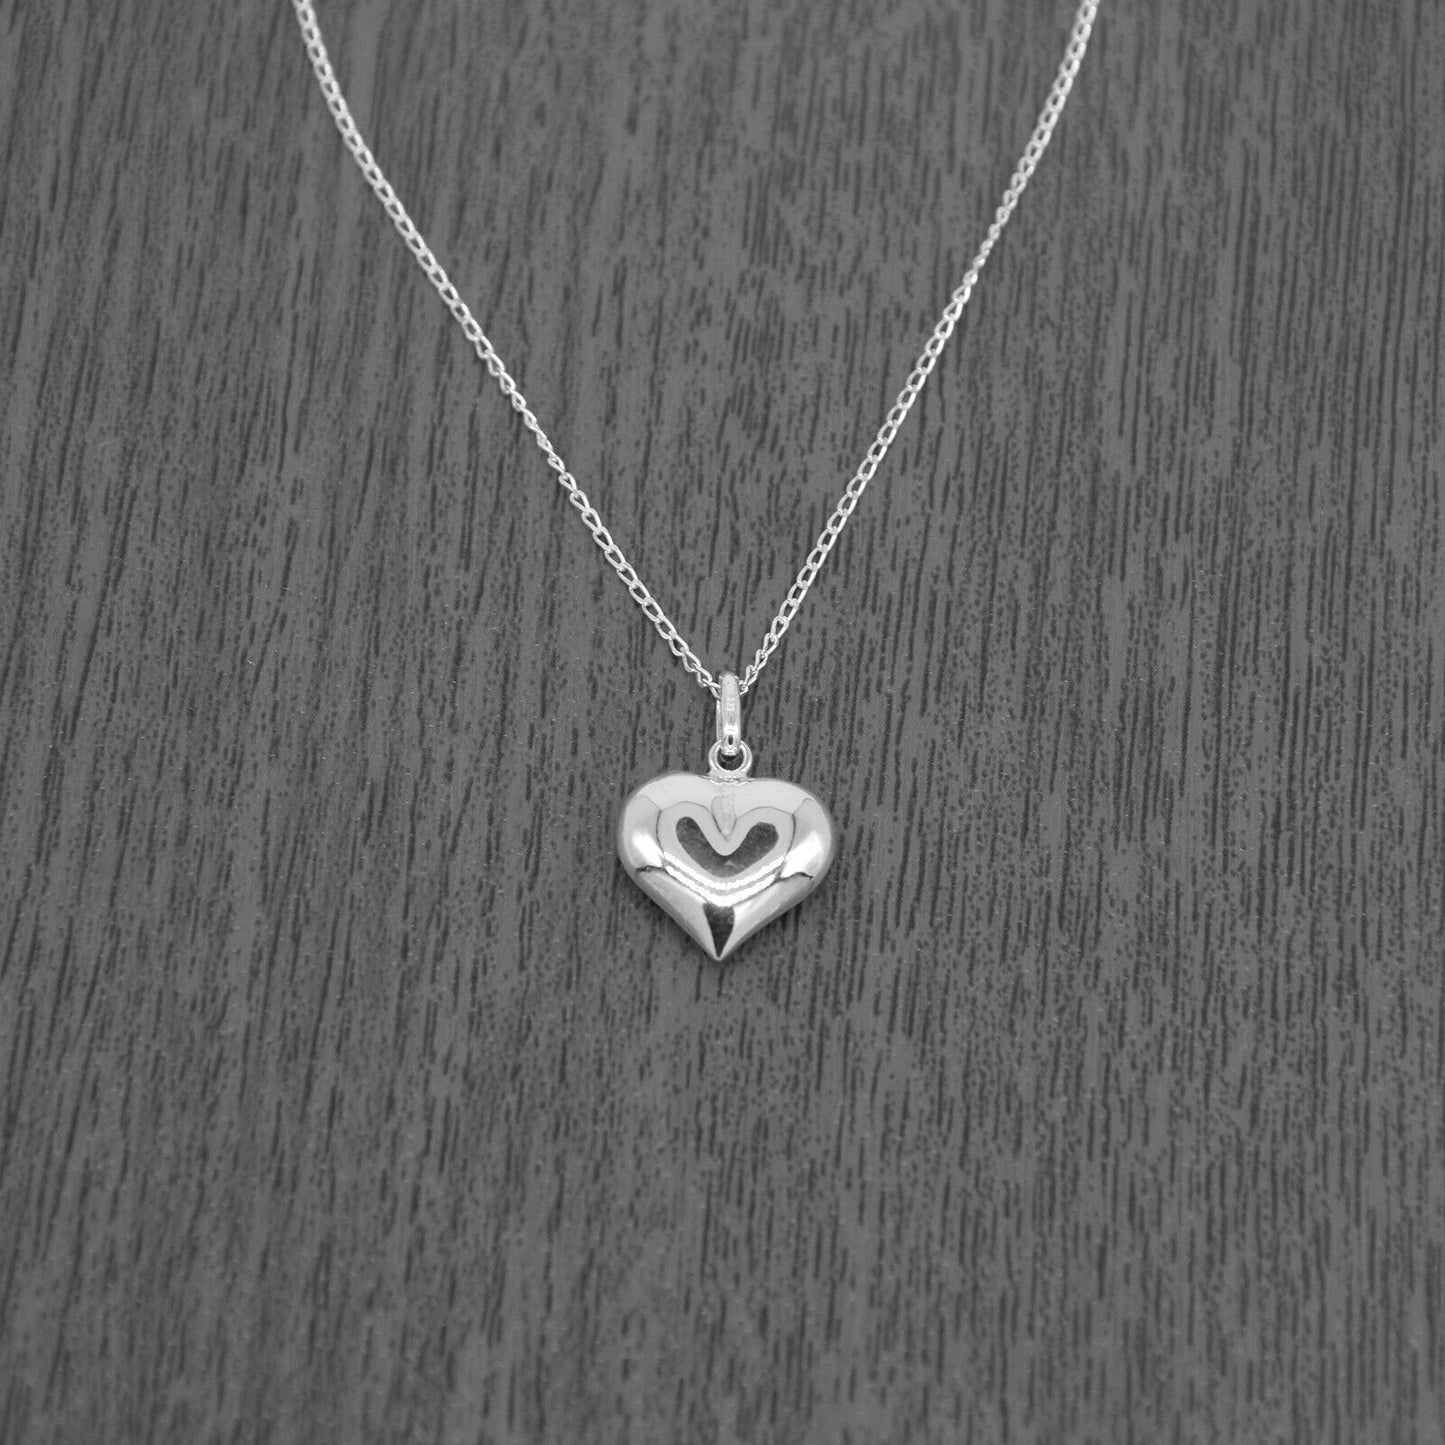 Genuine 925 Sterling Silver Puffed Heart Pendant Necklace on 14-24" Curb Chain